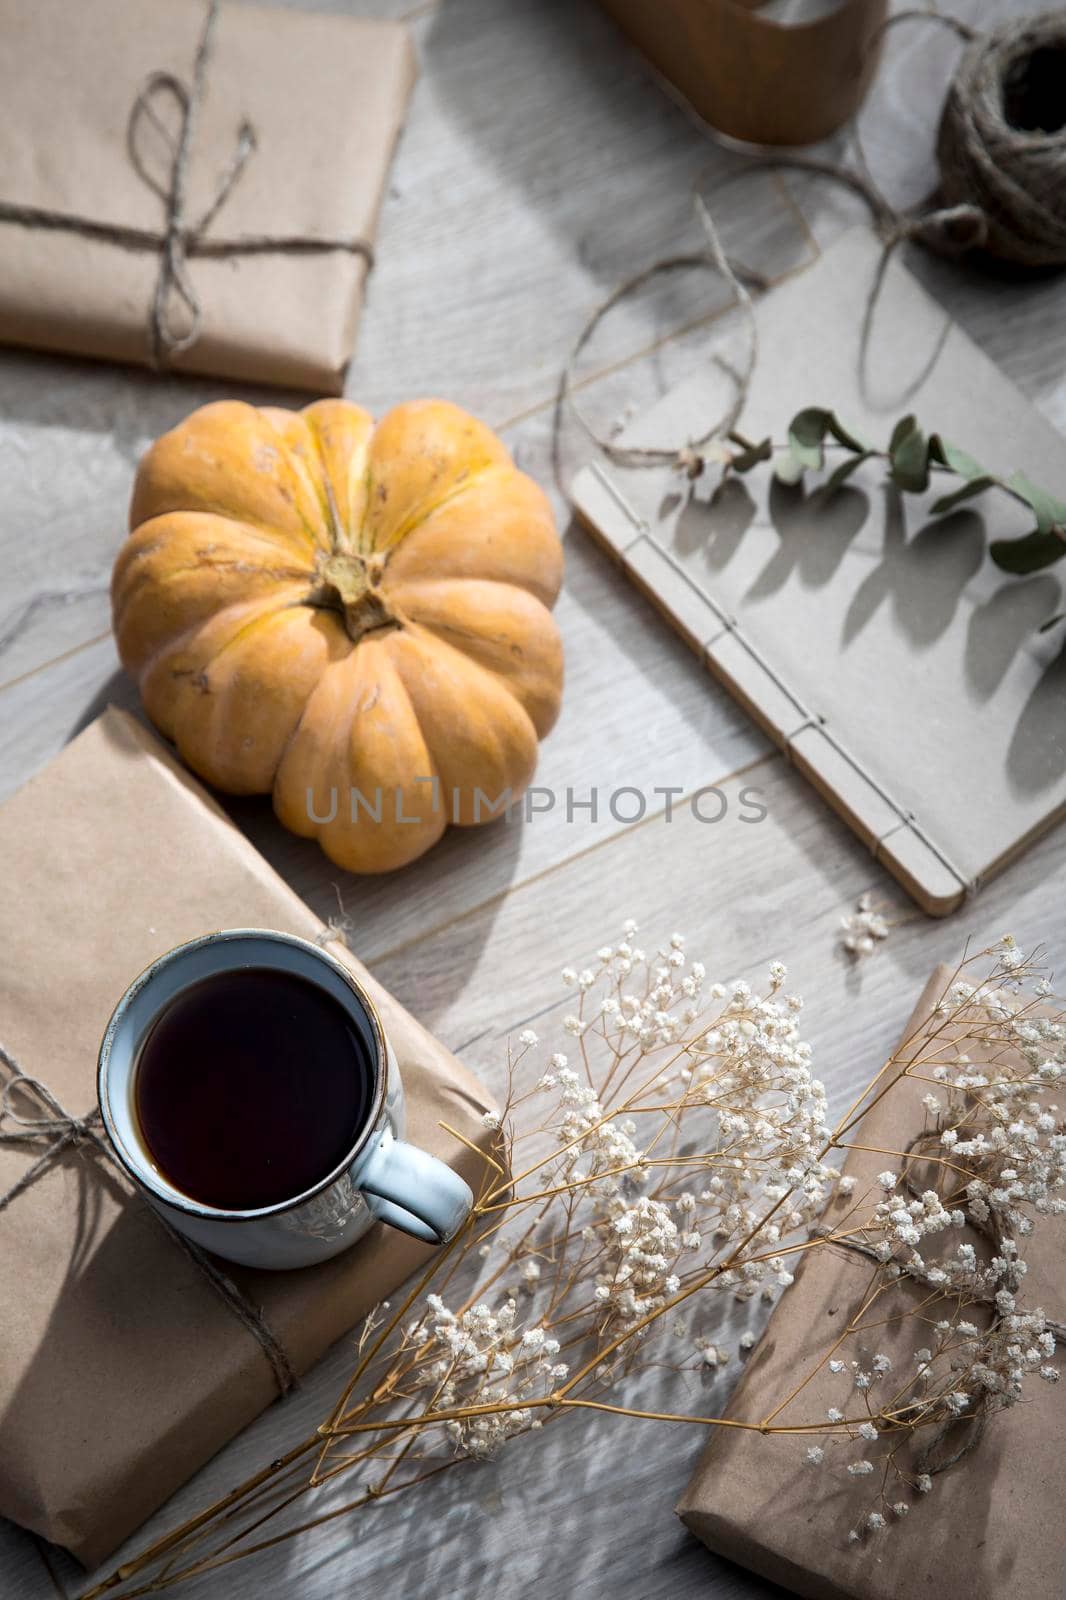 Packaged and bandaged gifts, pumpkins, a cup of tea and dried plants are on the table. Preparing for the birthday. by elenarostunova